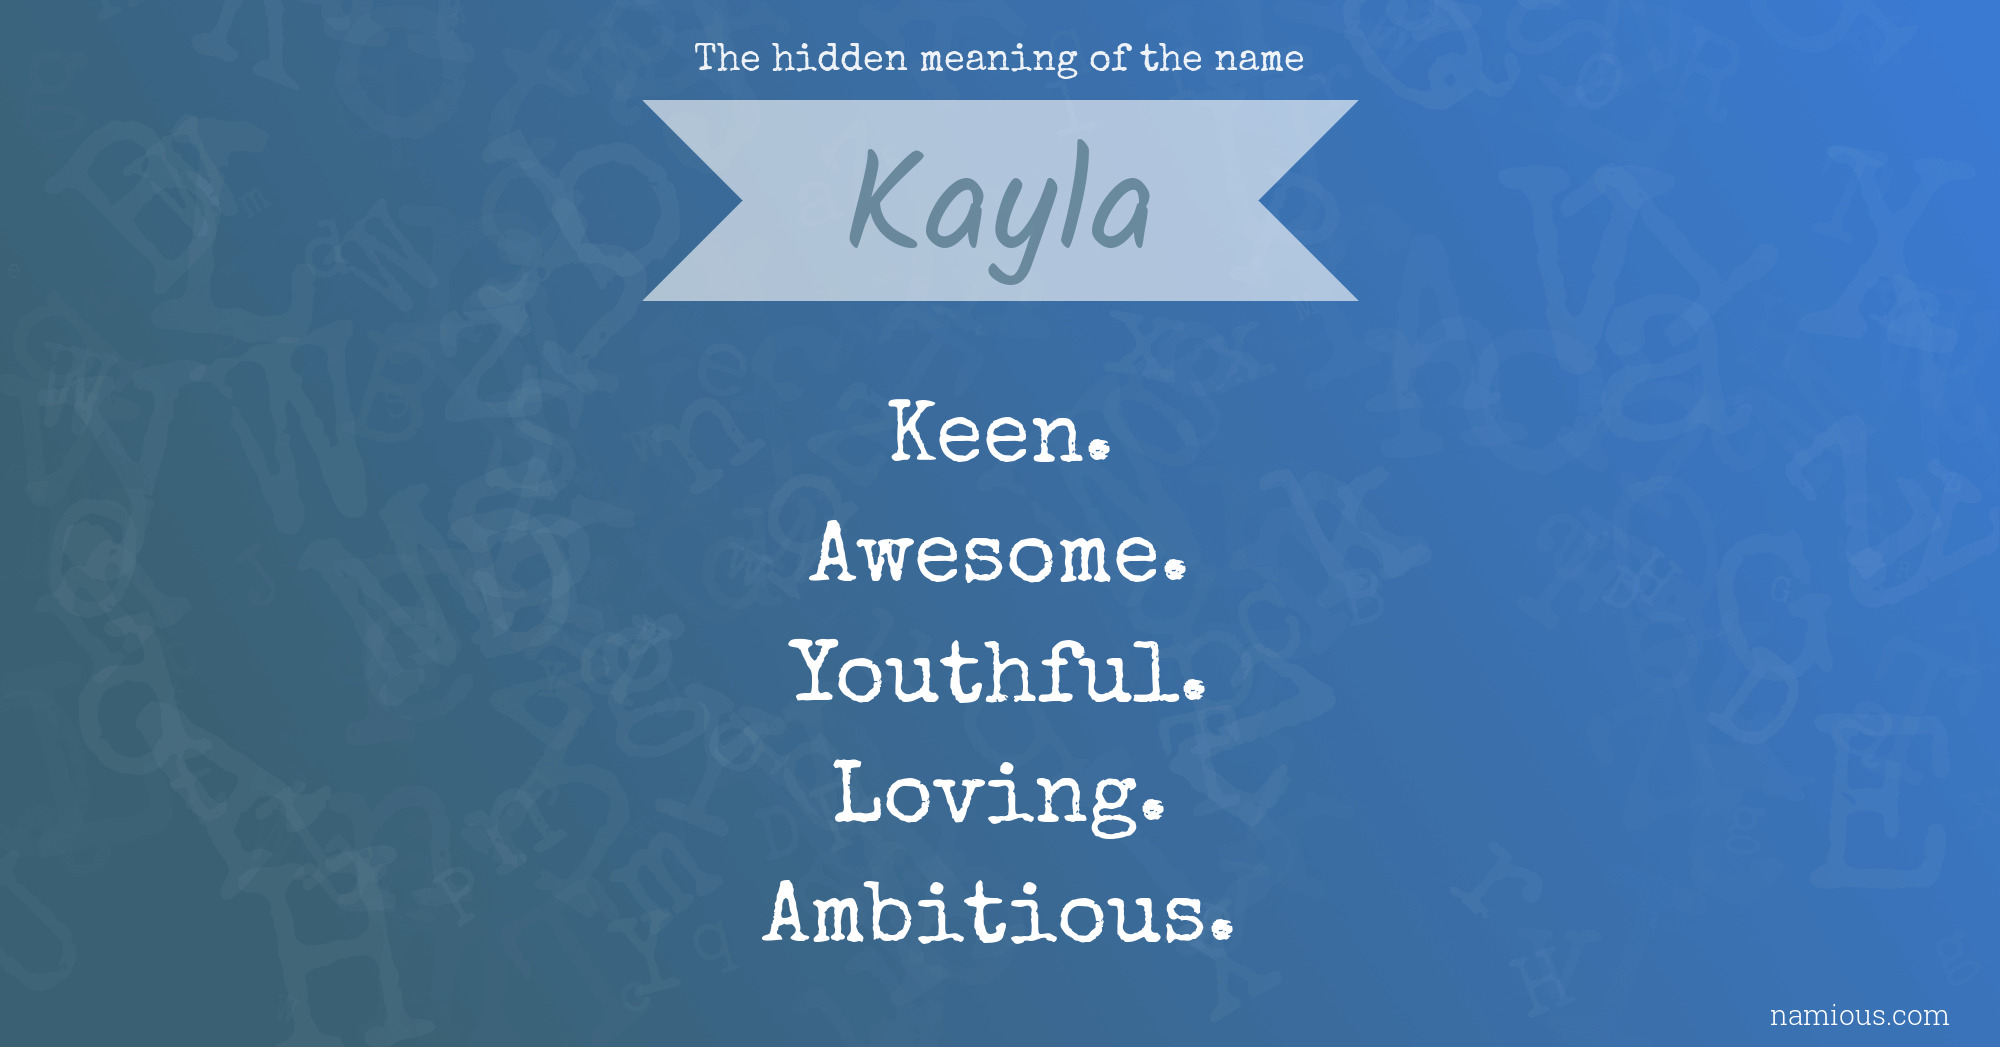 The hidden meaning of the name Kayla | Namious